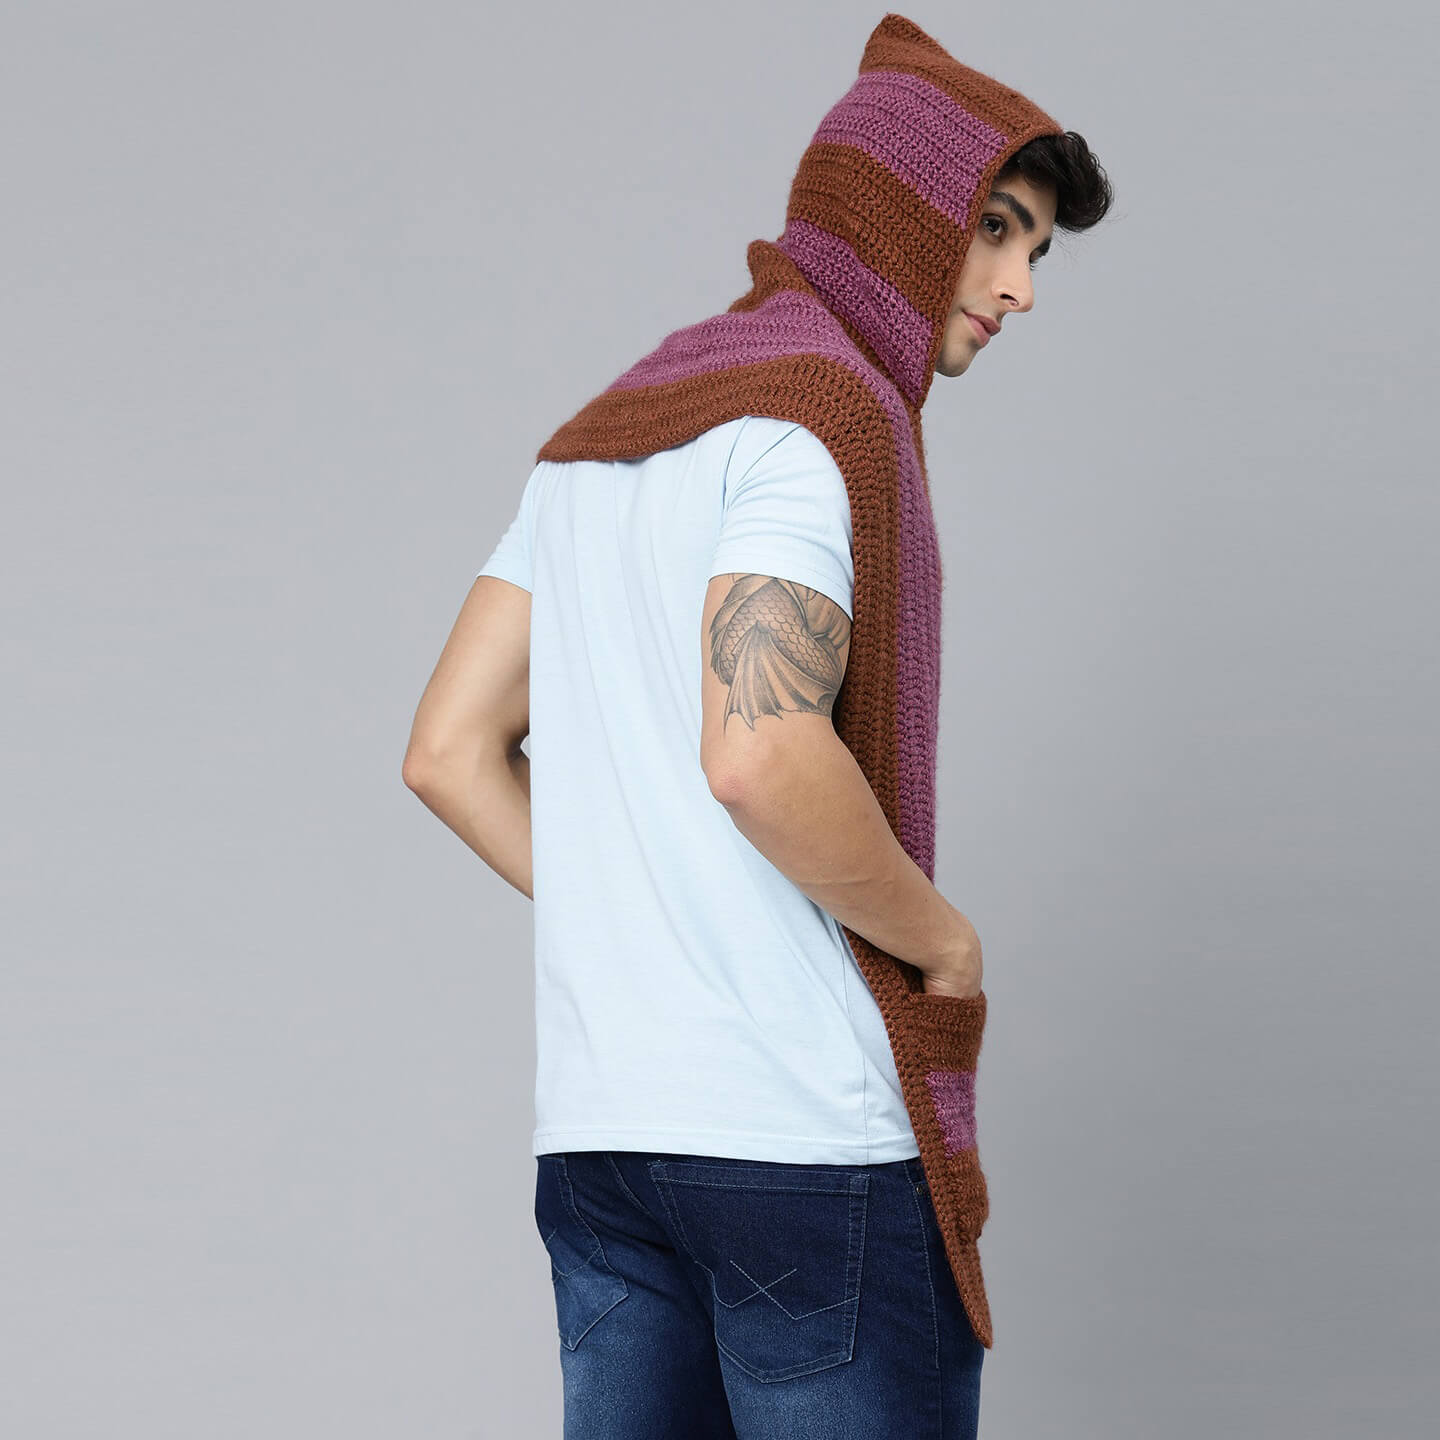 Hooded and Pocket Scarf - Multi-Color 2868